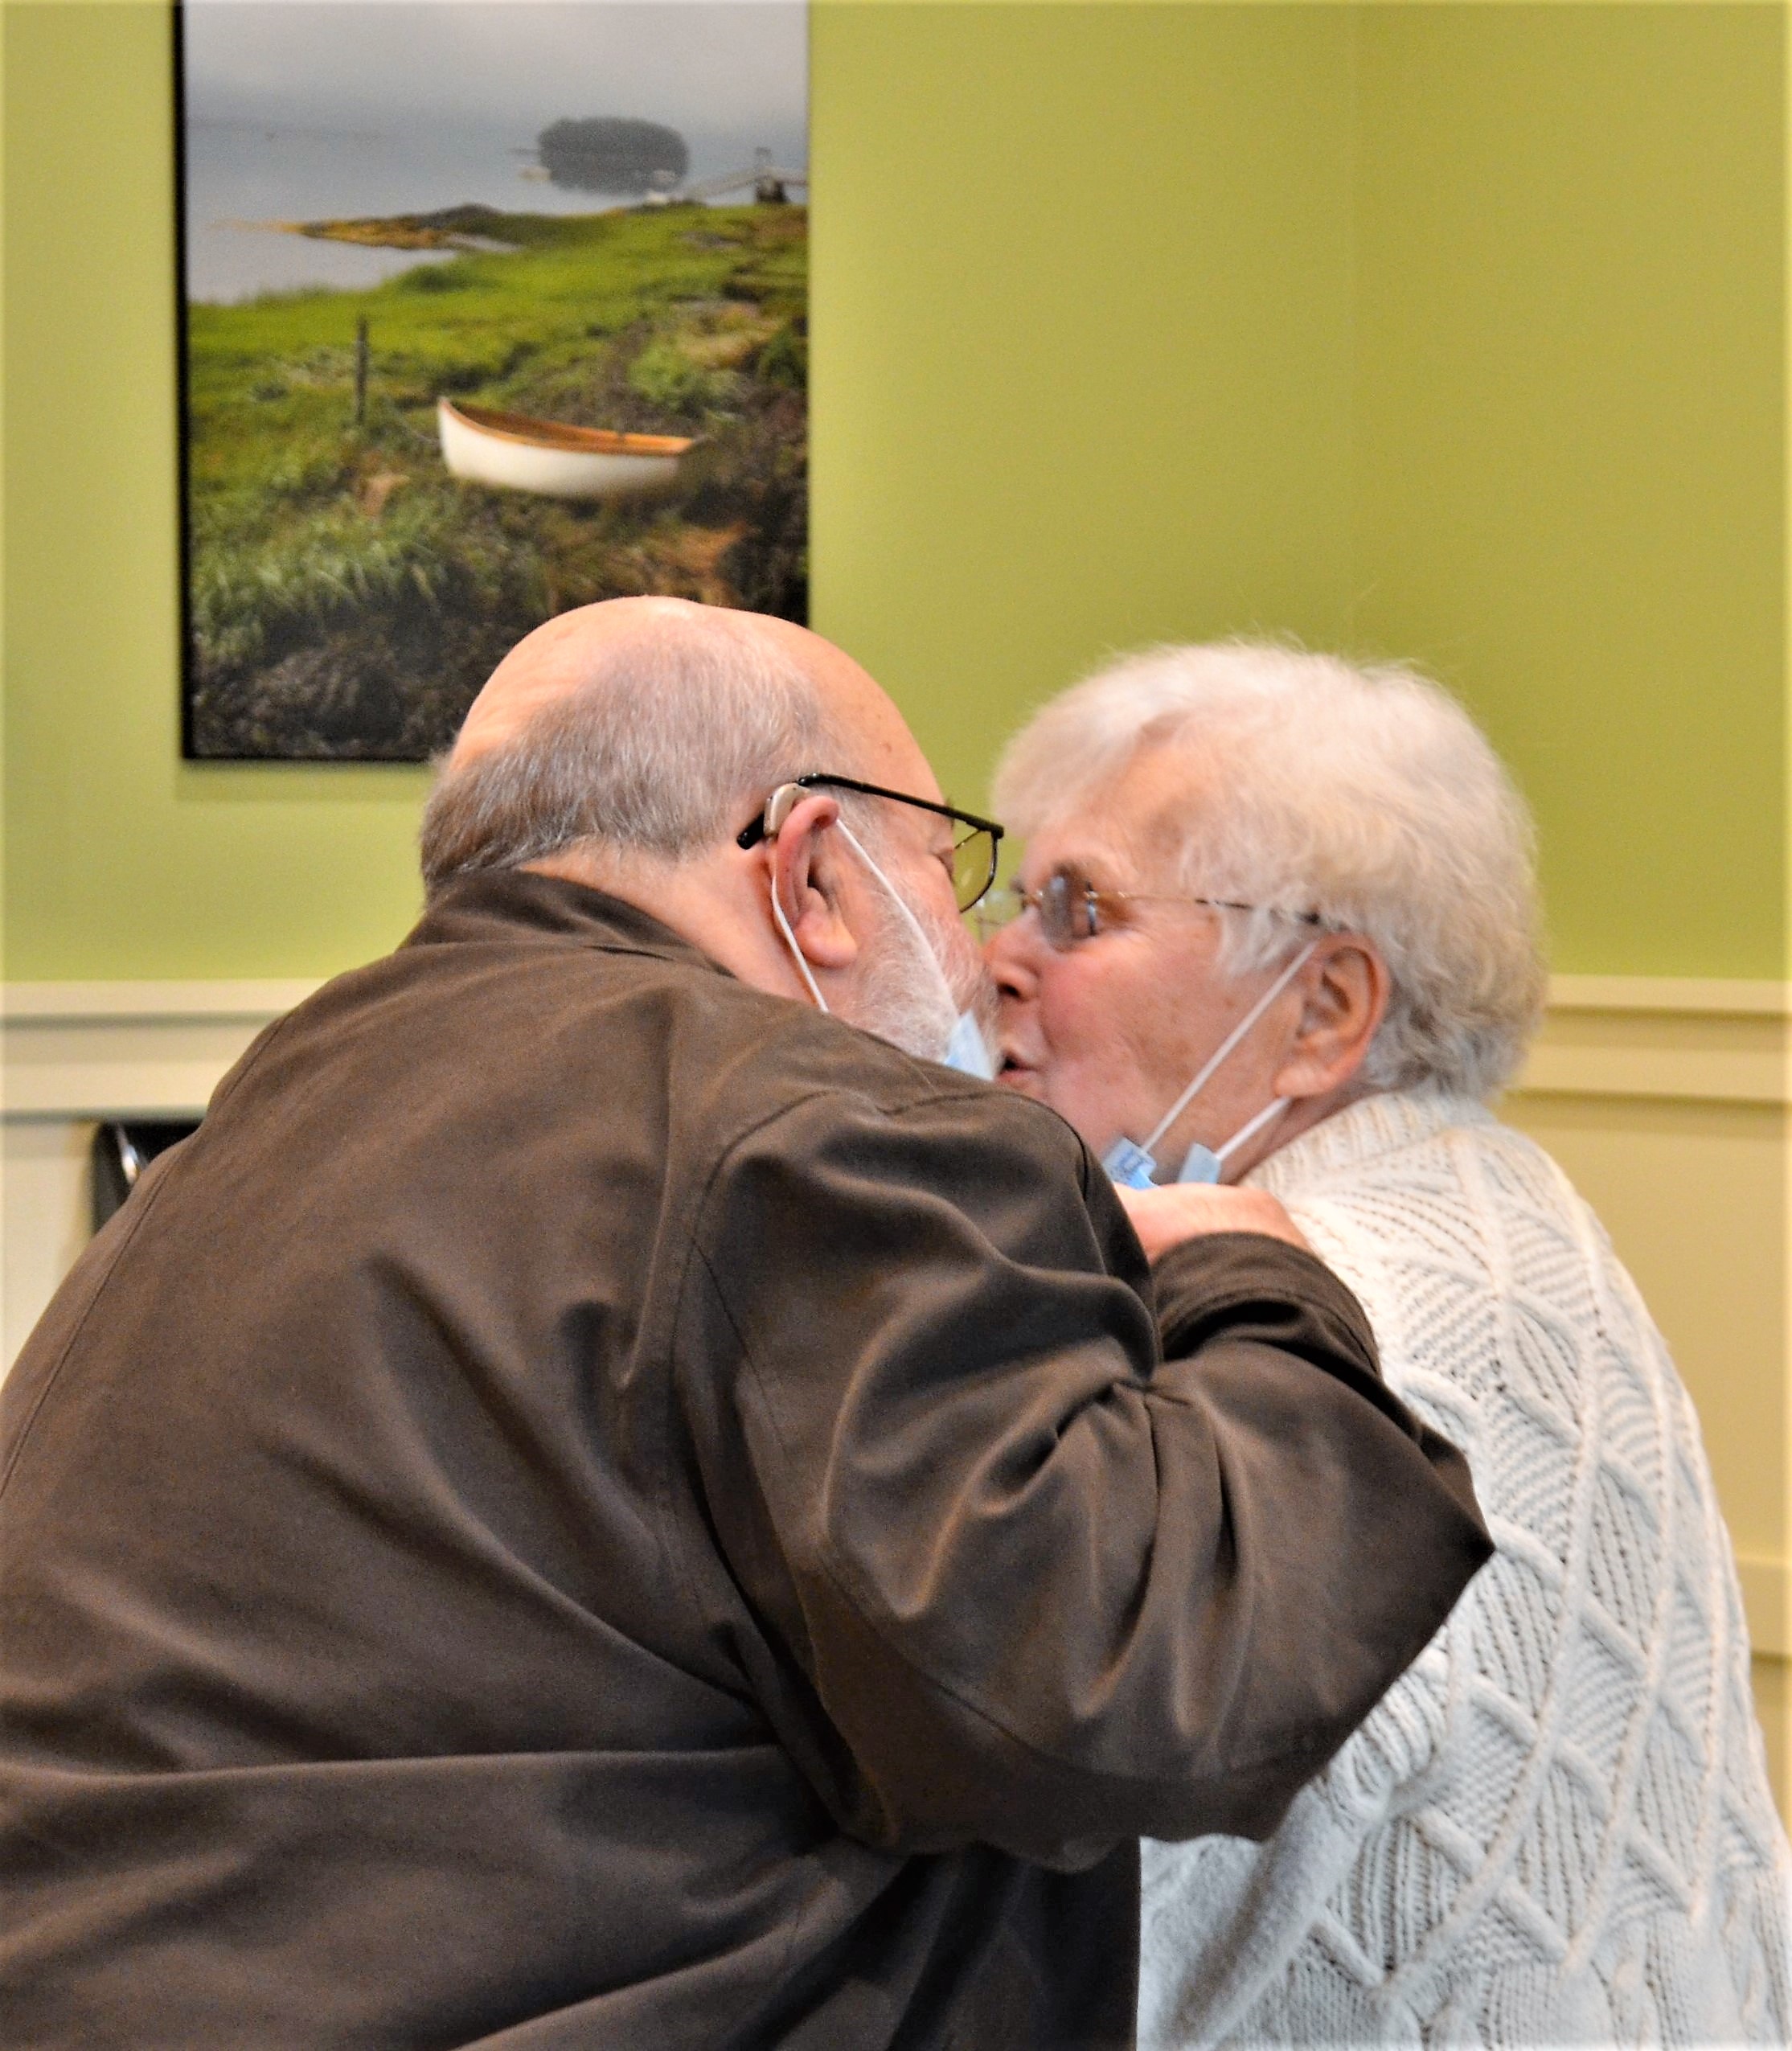 caregiver and his spouse kissing